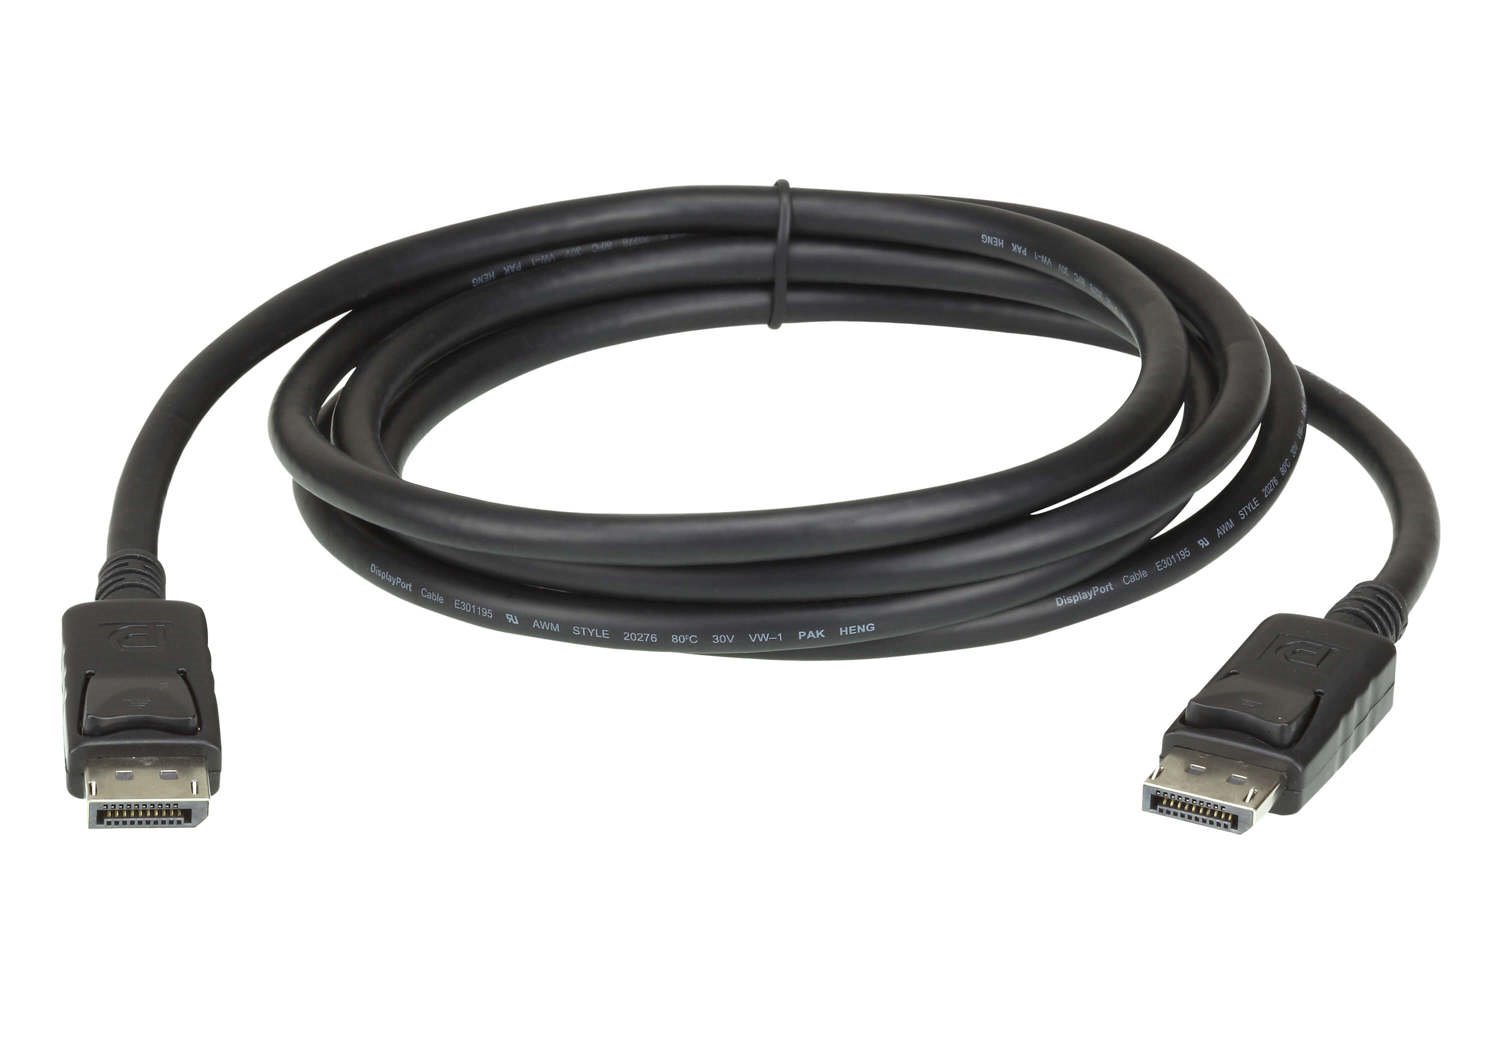 Aten 4.6M DisplayPort Cable, Supports Up To 4K (3840 X 2160 @ 60Hz), DP 1.2, High Bit Rate 3 (HBR3) Bandwidth Of 21.6 GBPS